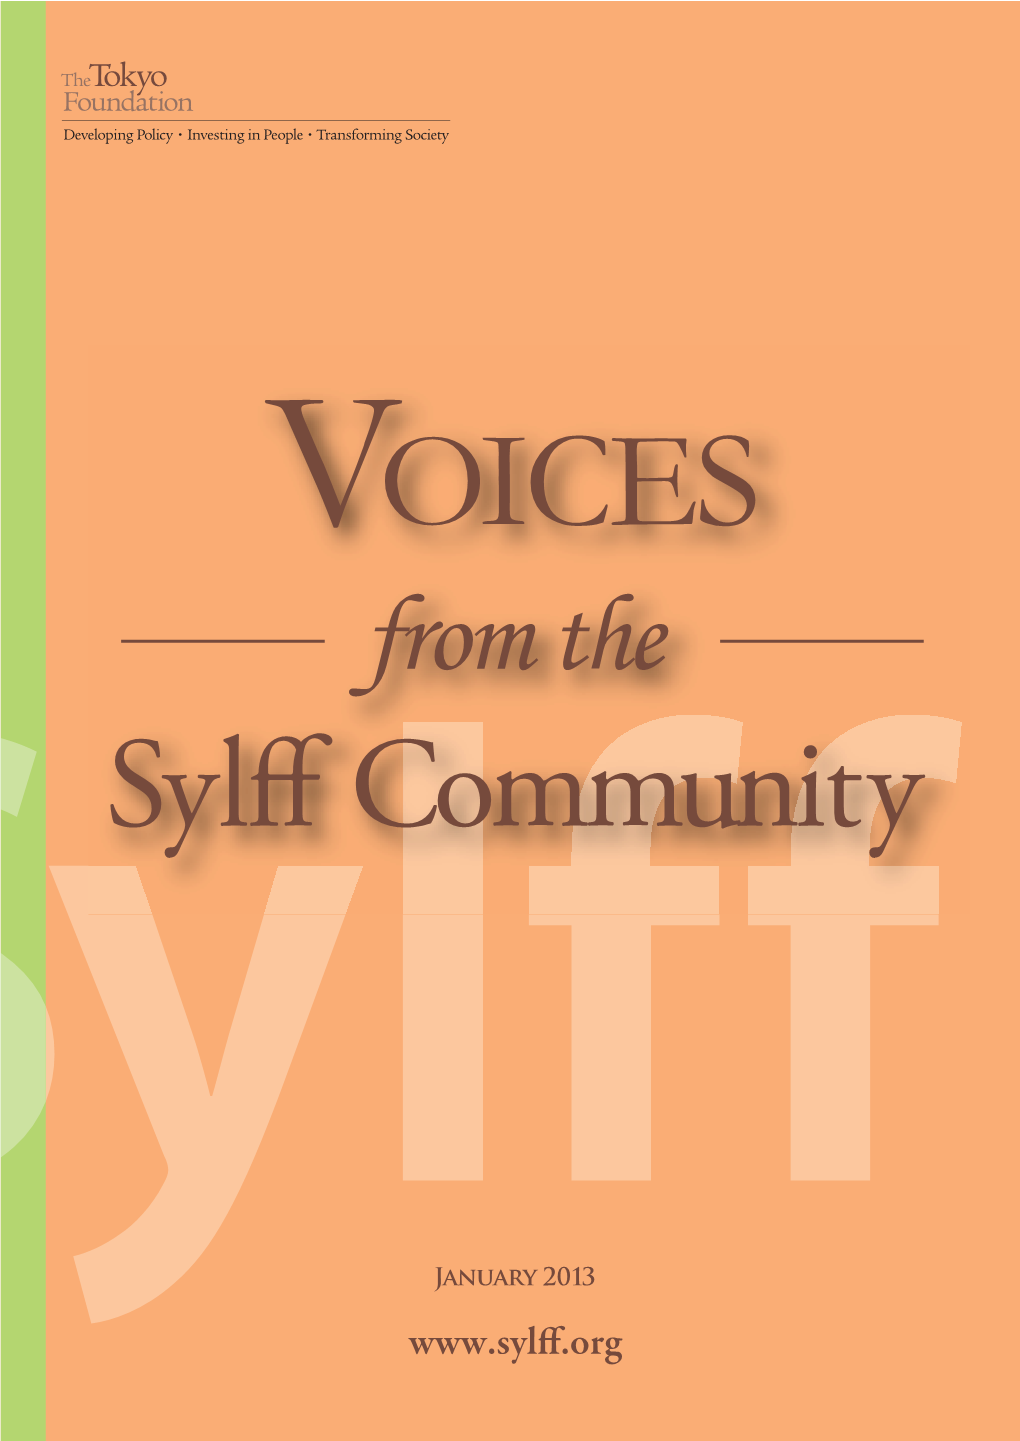 Sylff Community and to Enrich Their Academic Activities